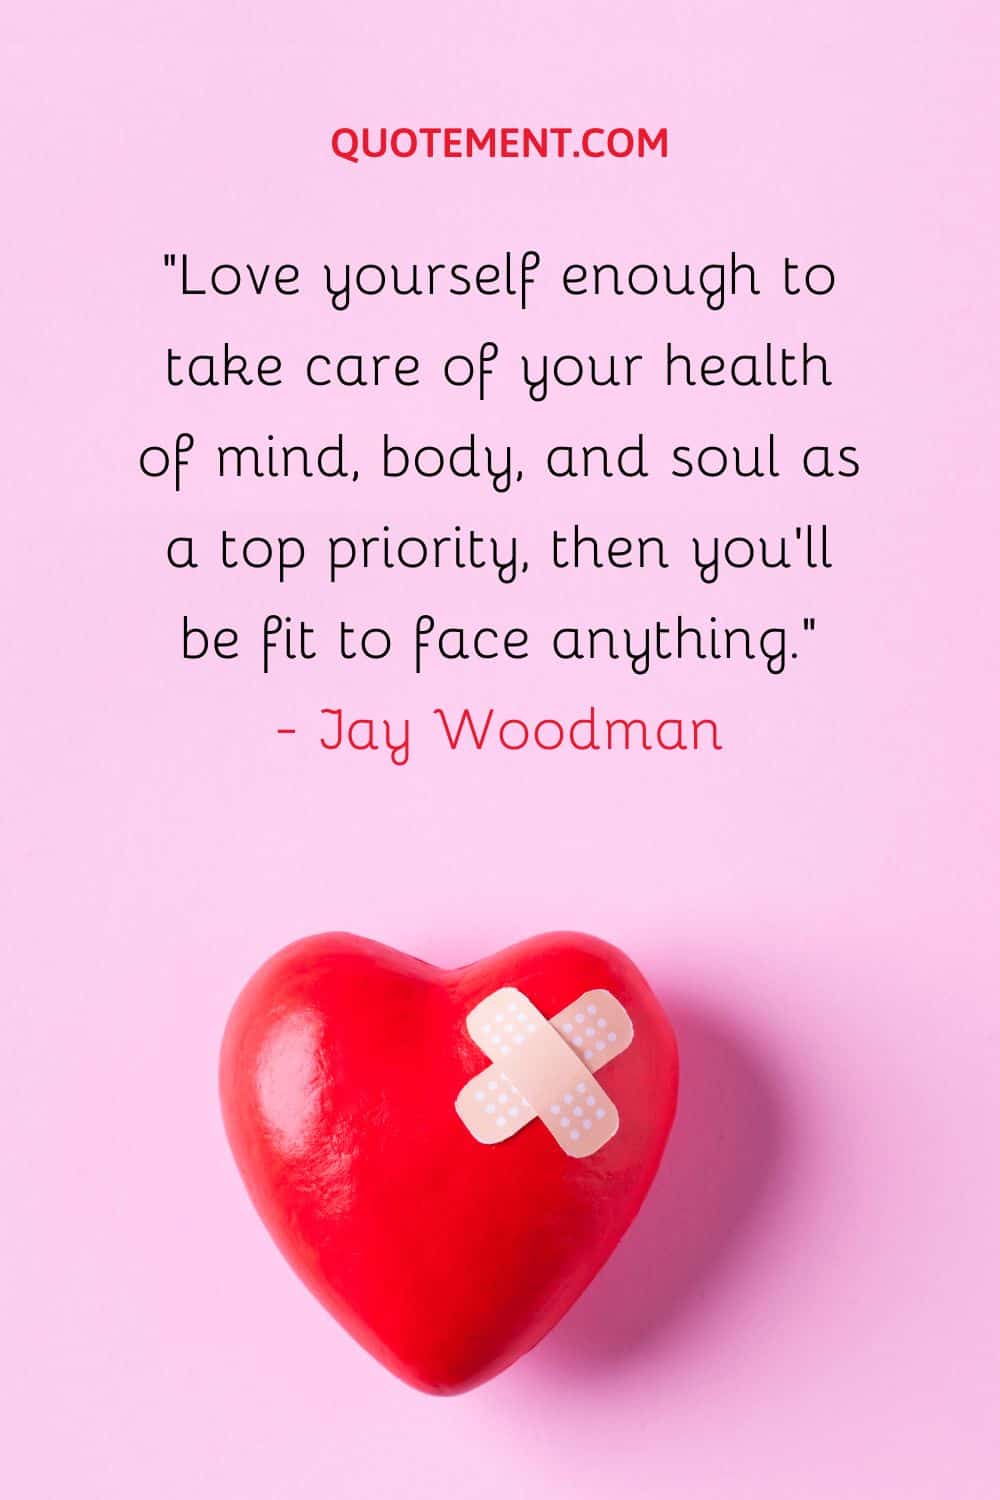 Love yourself enough to take care of your health